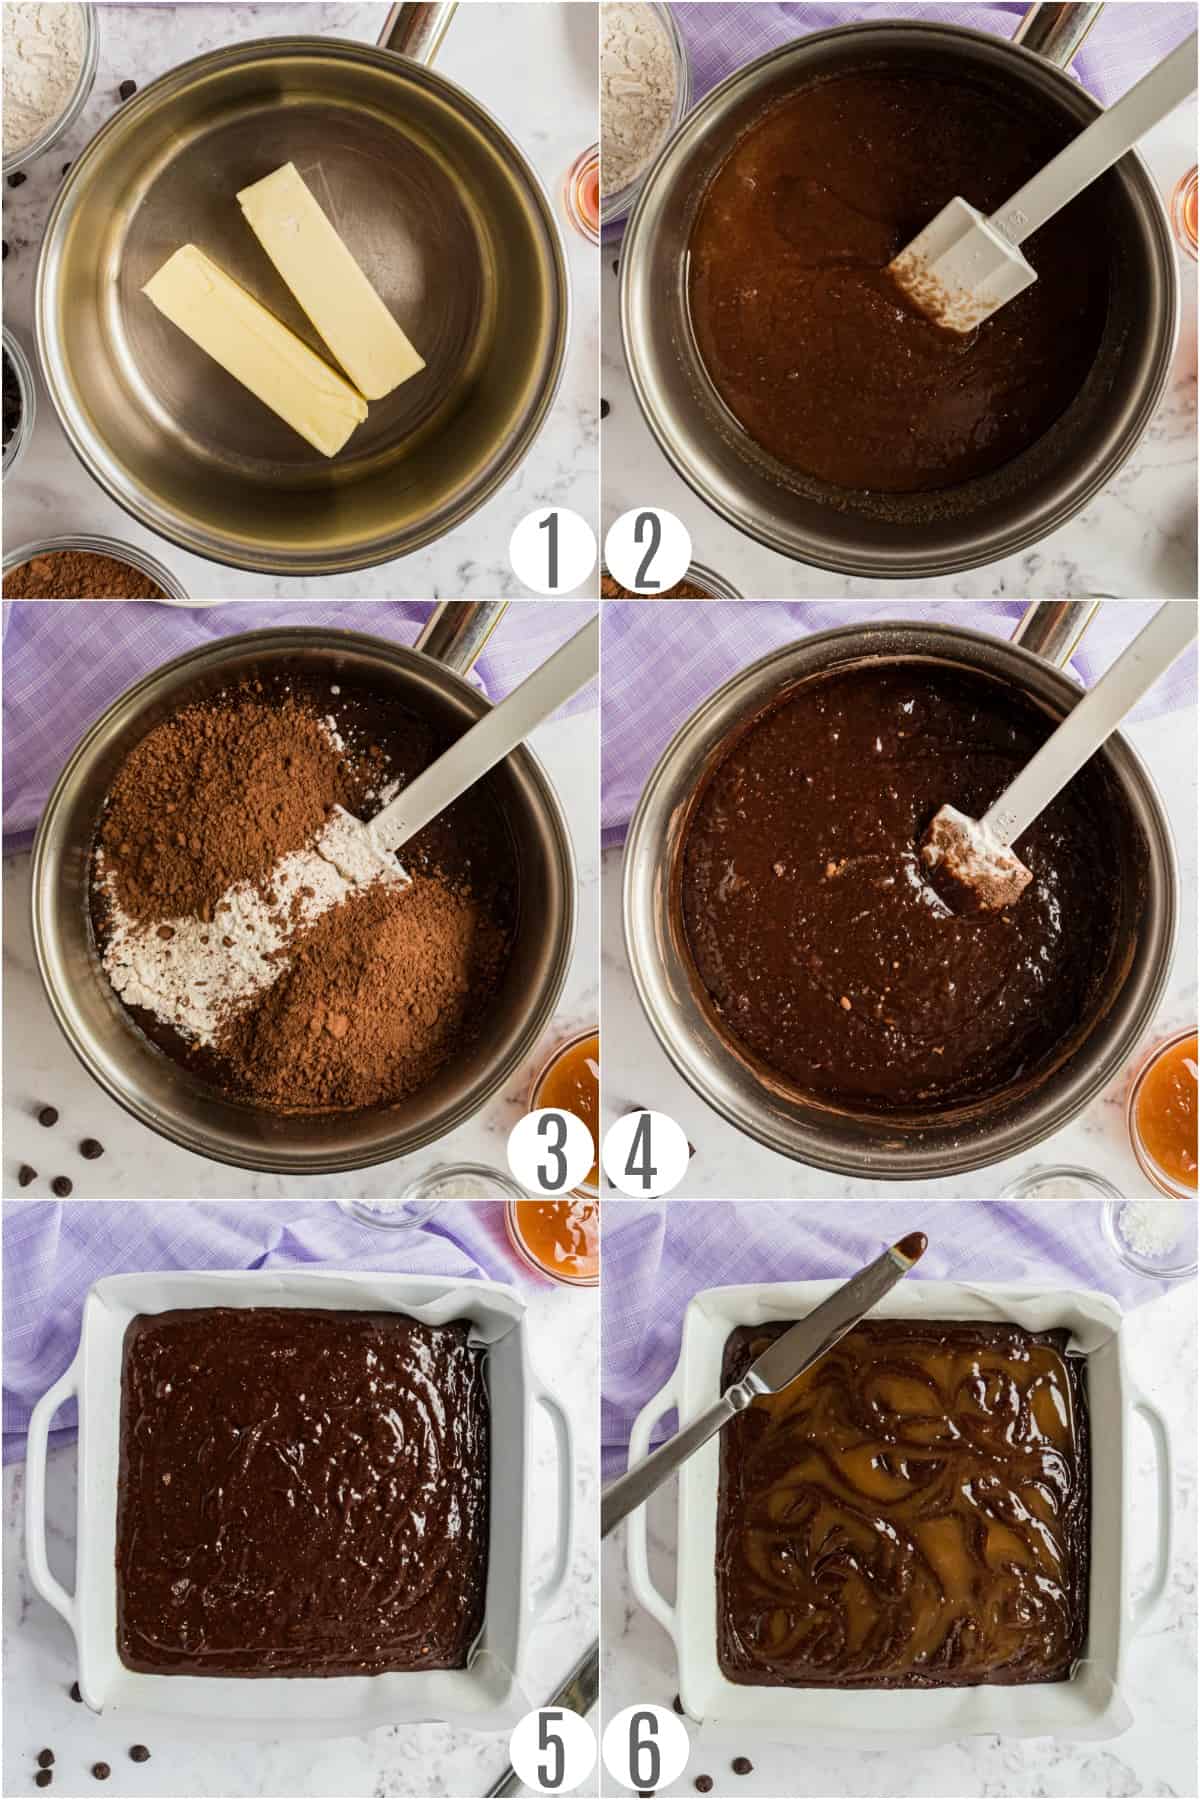 Step by step photos showing how to make brownies with caramel sauce.